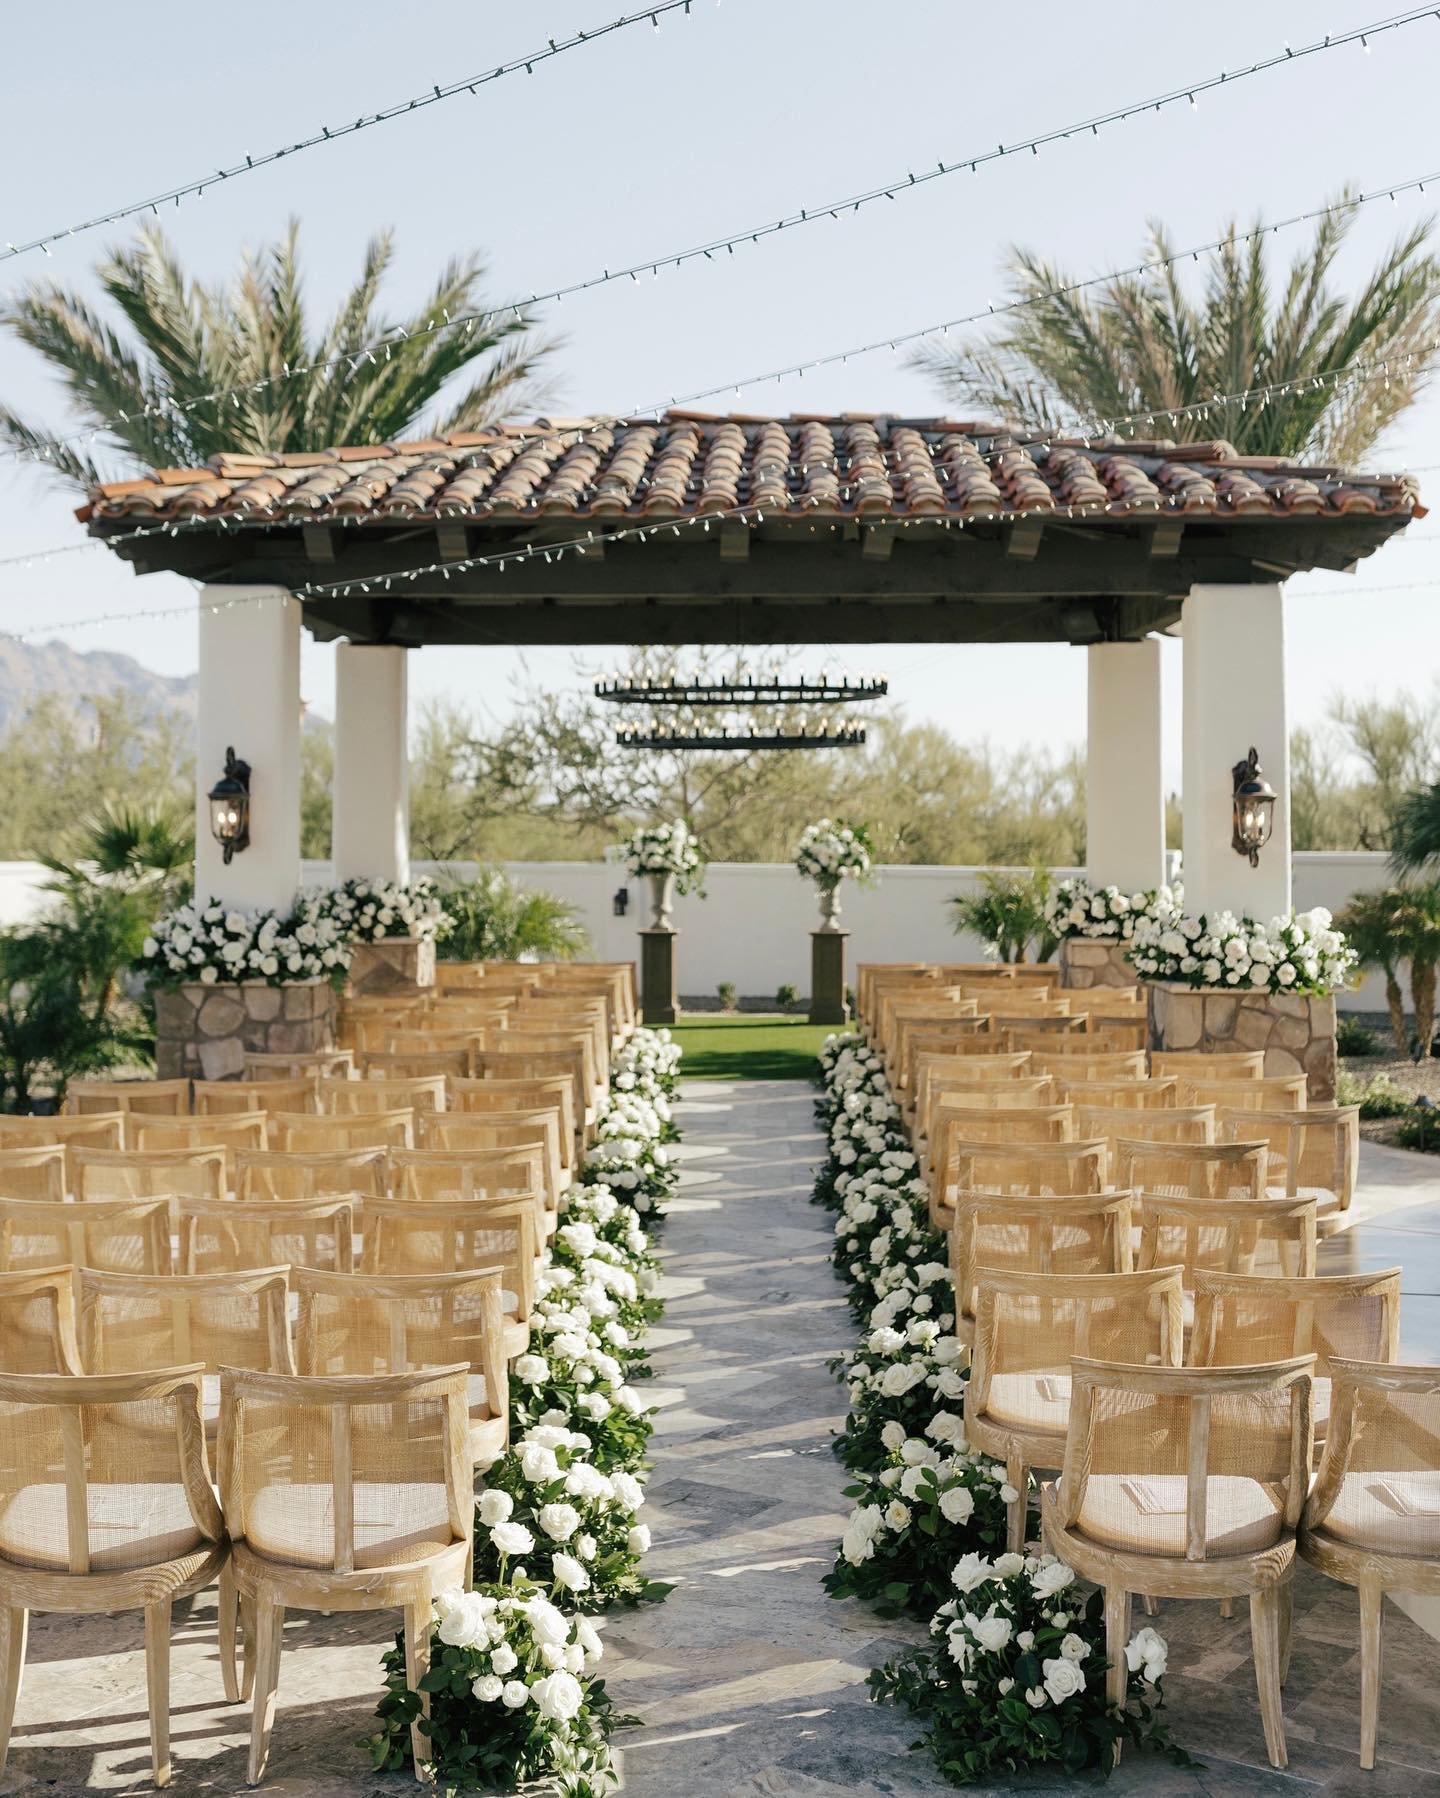 Loving this backyard ceremony setup in Tucson!😍featuring our Mae Dining Chairs
&bull;
Planner: @imoni_events @hannahebowman
Photo: @kayleechelseaphotography 
Florist: @mintgreendesign
Paper: @carolinehainescreative
Music: @sweetwaterstrings
Rentals: